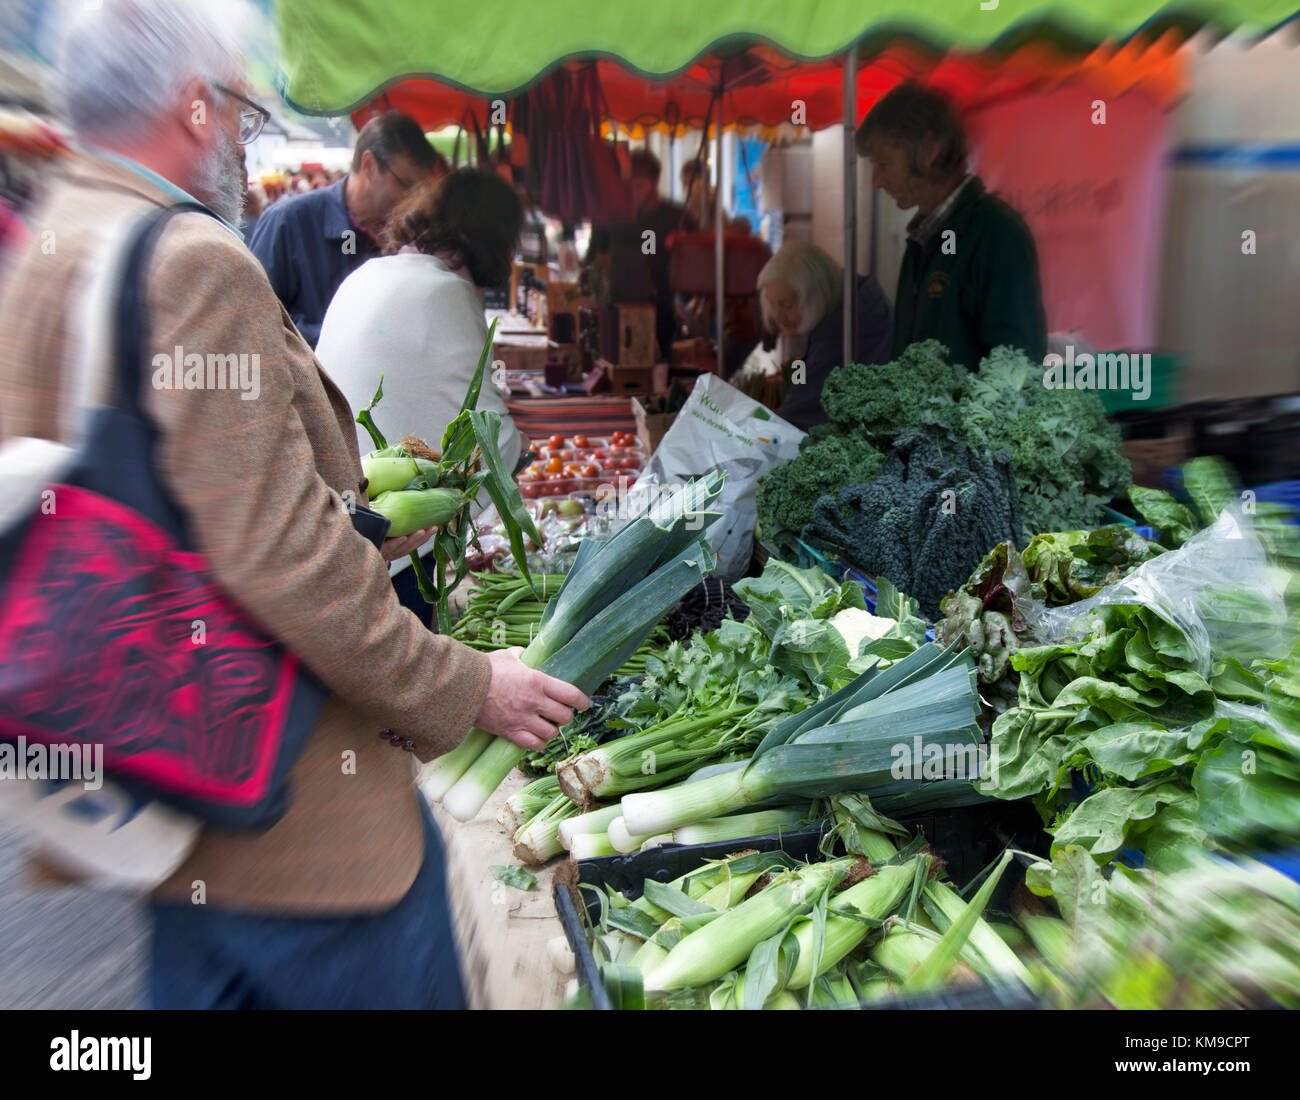 A man buys leeks and sweetcorn from a stall at the awatrd winning Stroud Farmers Market in Gloucestershire, UK Stock Photo